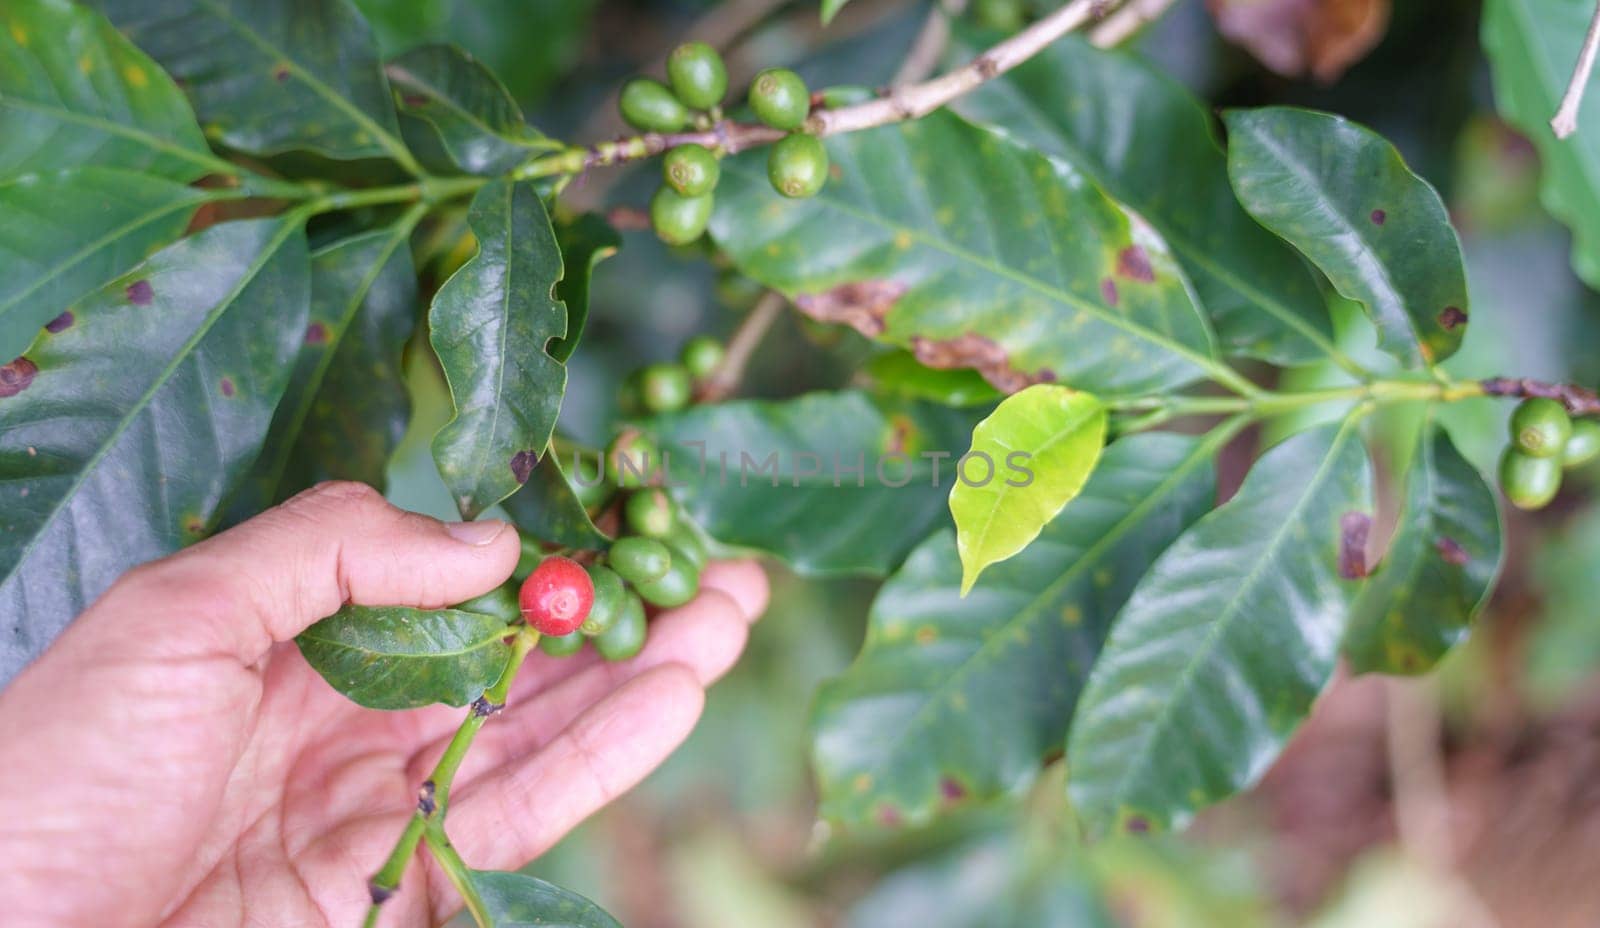 Careful selection of perfectly ripe coffee berries from plant branch with green leaves and a rock in the background